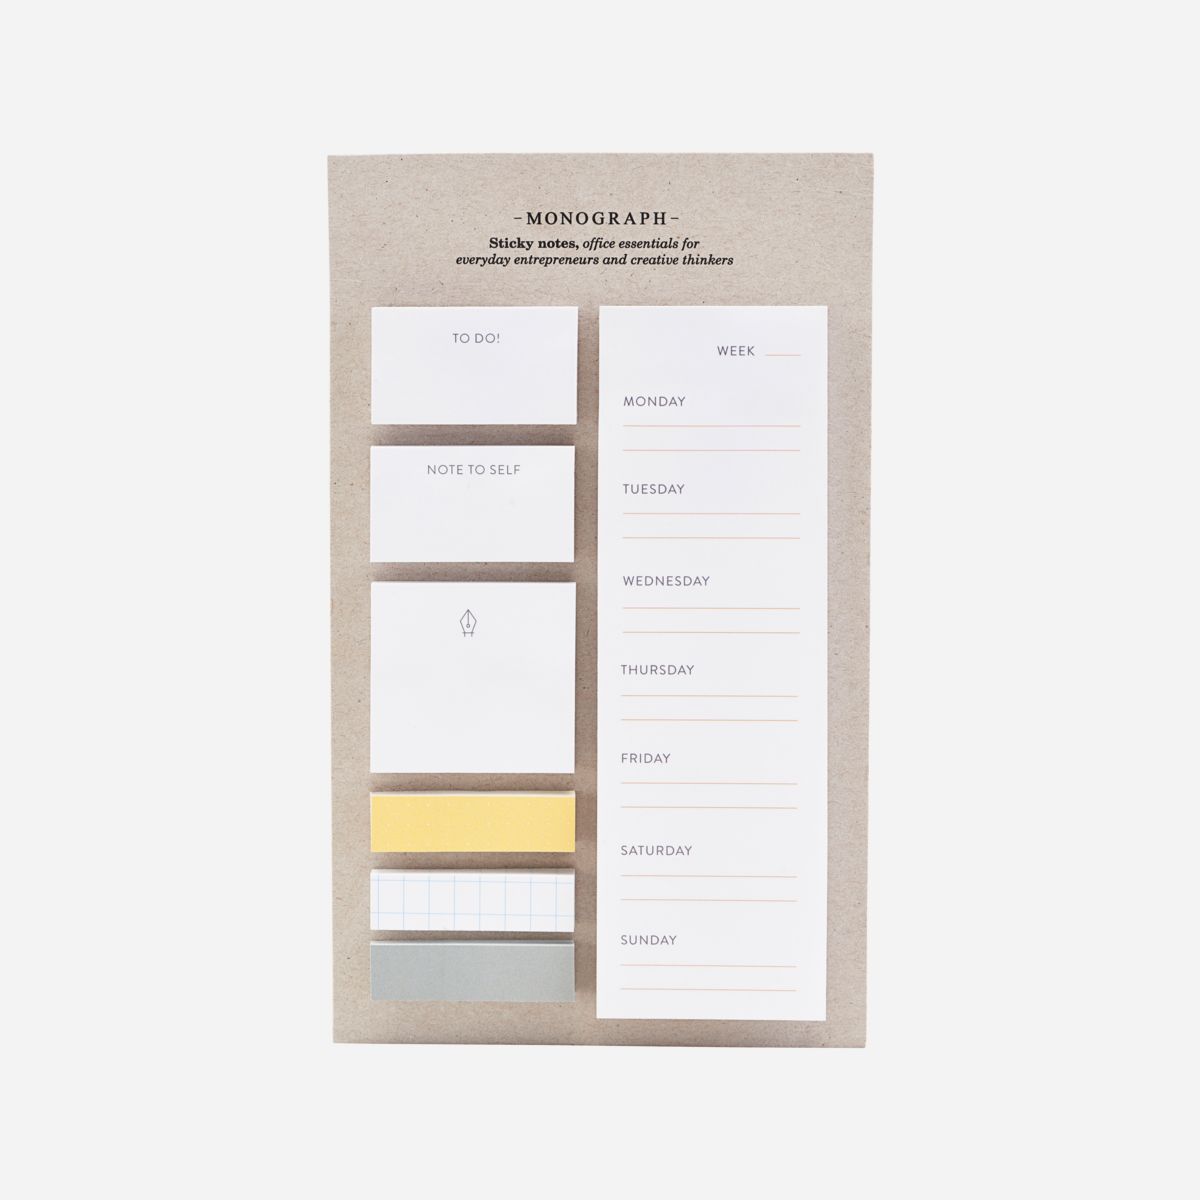 Monograph Sticky Notes